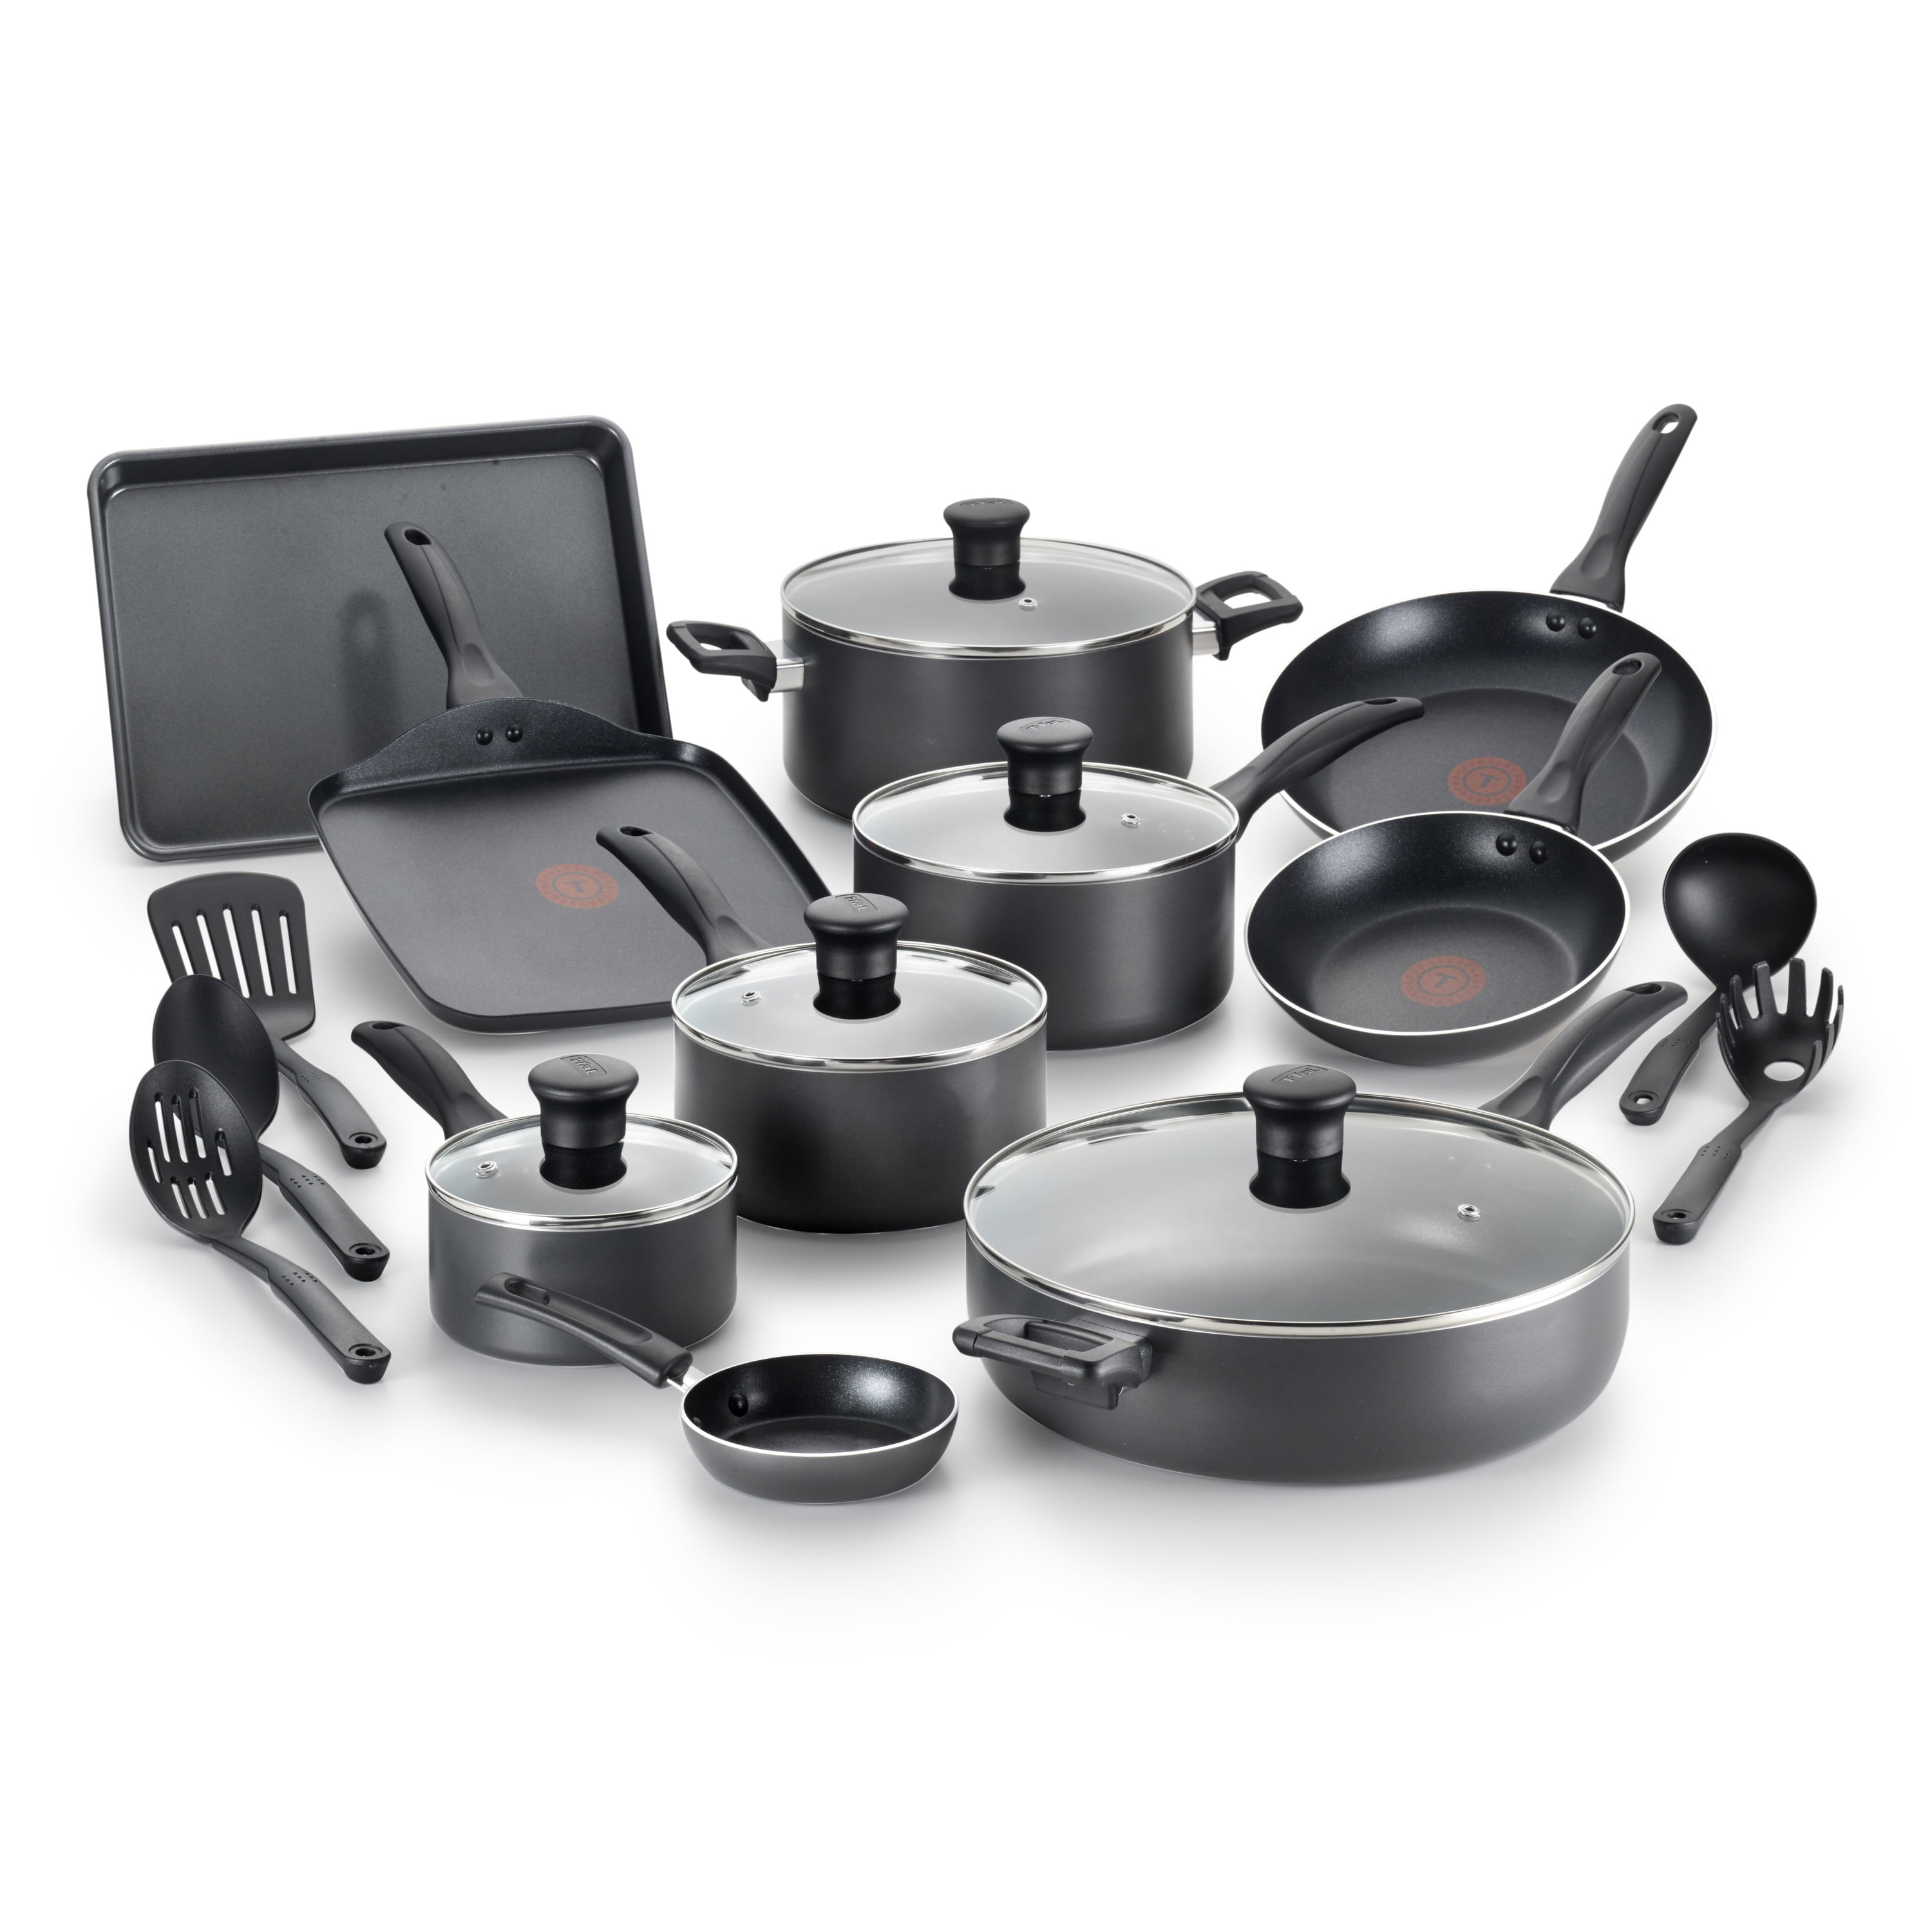 T-Fal 18-Piece Nonstick Assorted Cookware Set Including Nonstick Pots and  Pans Plus Measuring Tools, Utensils and a Steamer, Grey (New Open Box) 